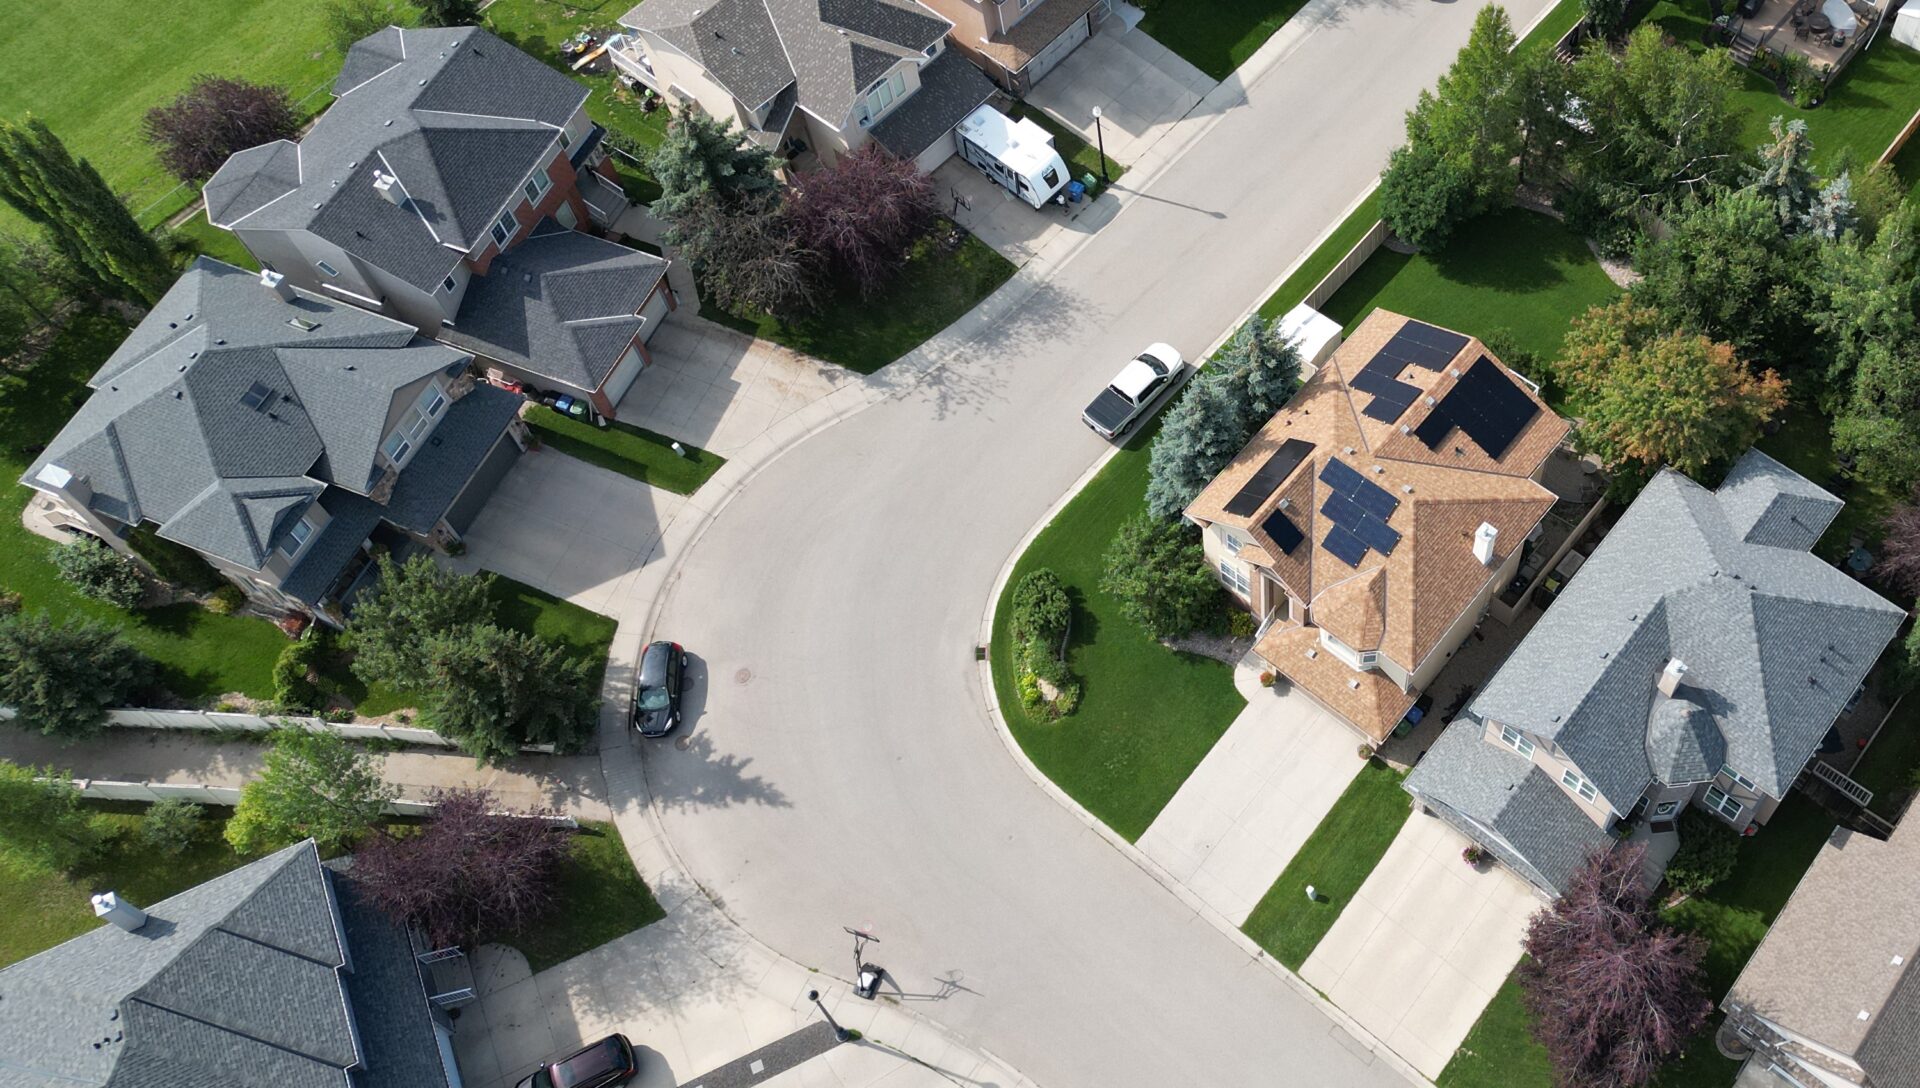 Aerial view of a suburban cul-de-sac showing detached houses with pitched roofs, well-manicured lawns, driveways with parked cars, and leafy trees.